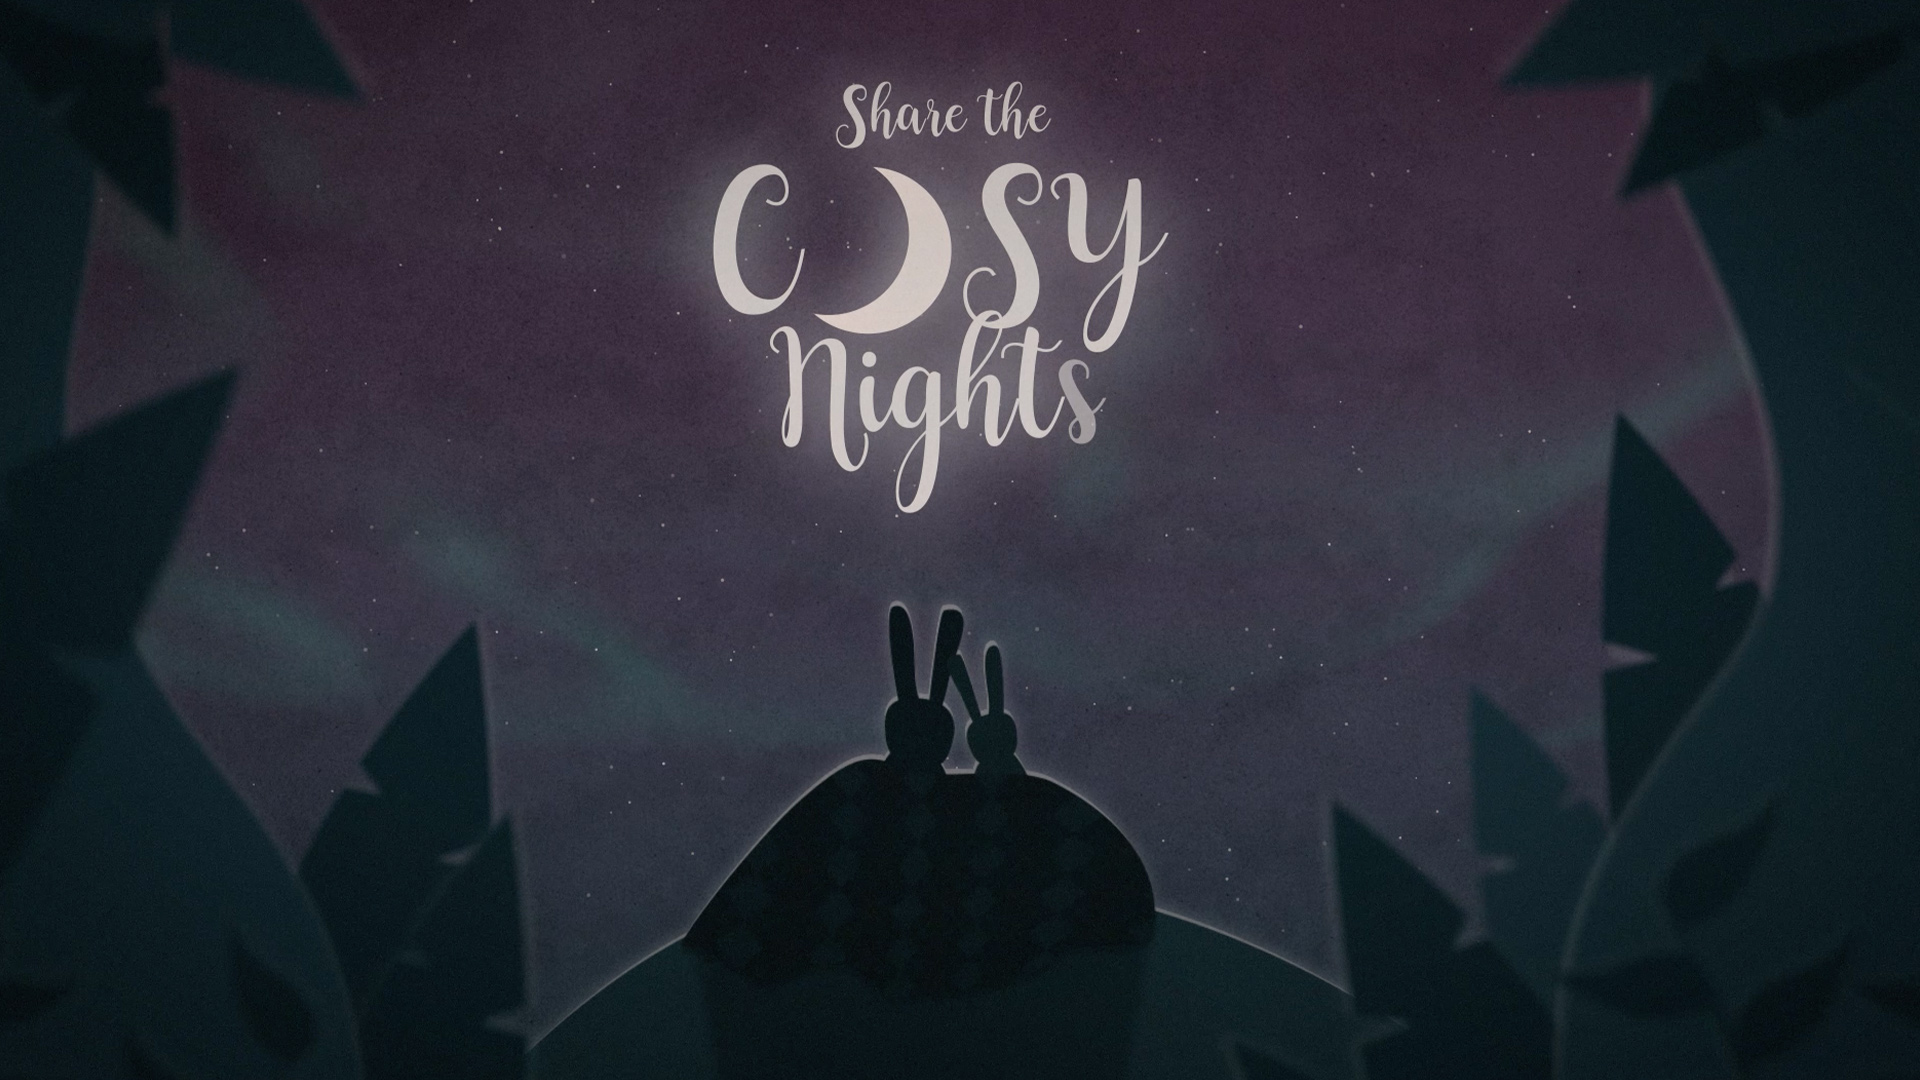 Share the Cosy Nights